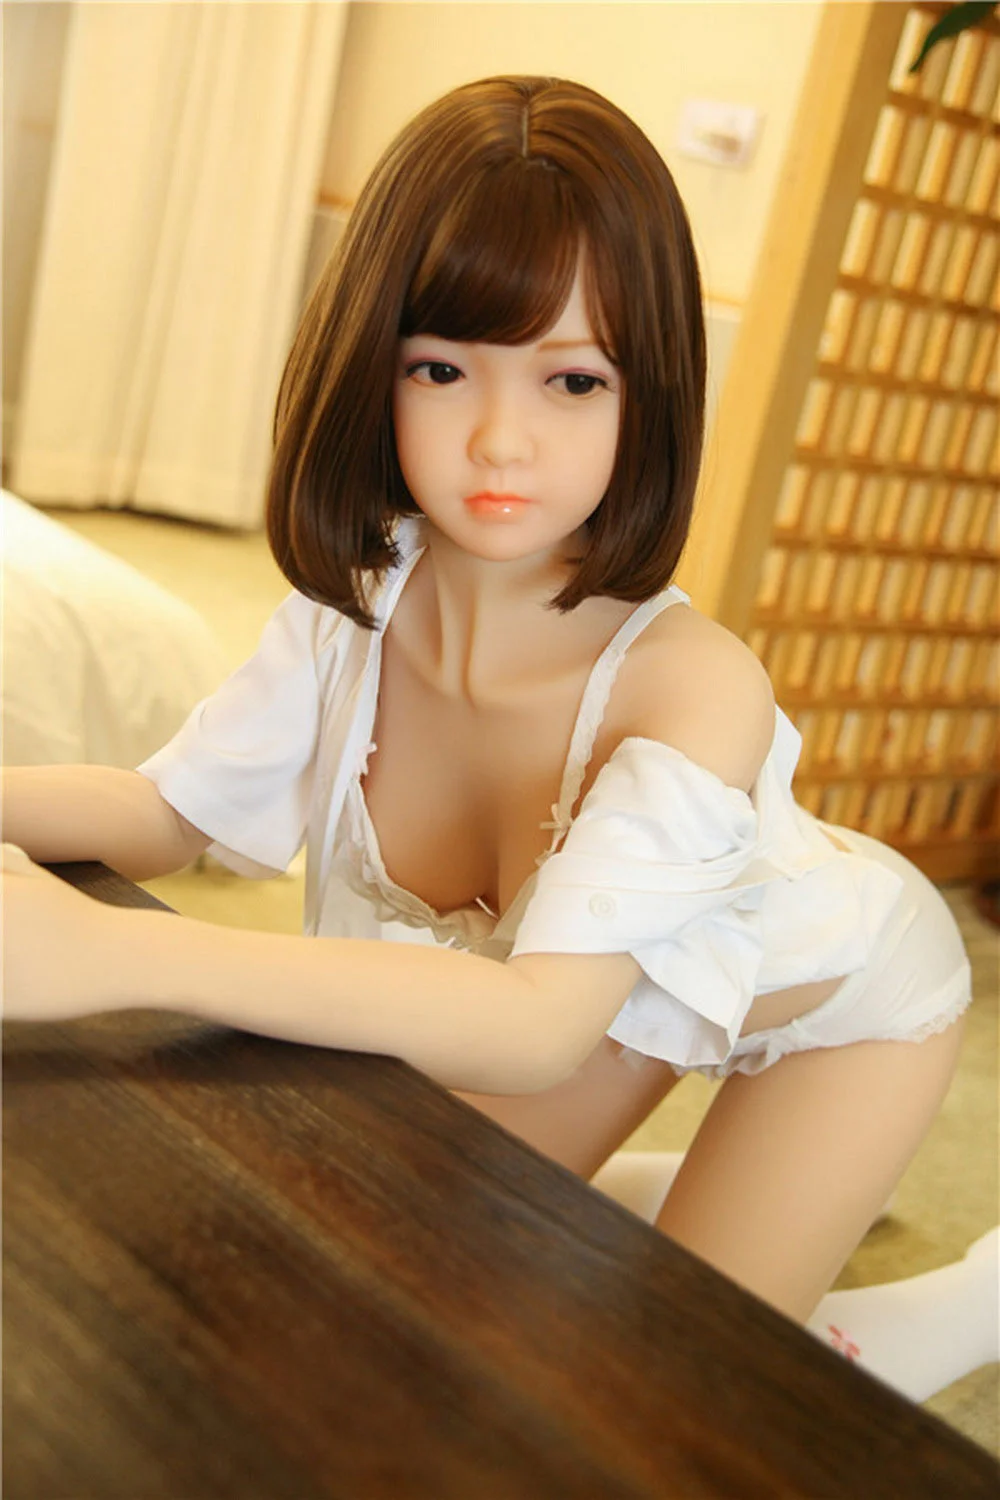 Sex doll kneeling on the ground with hands on the coffee table